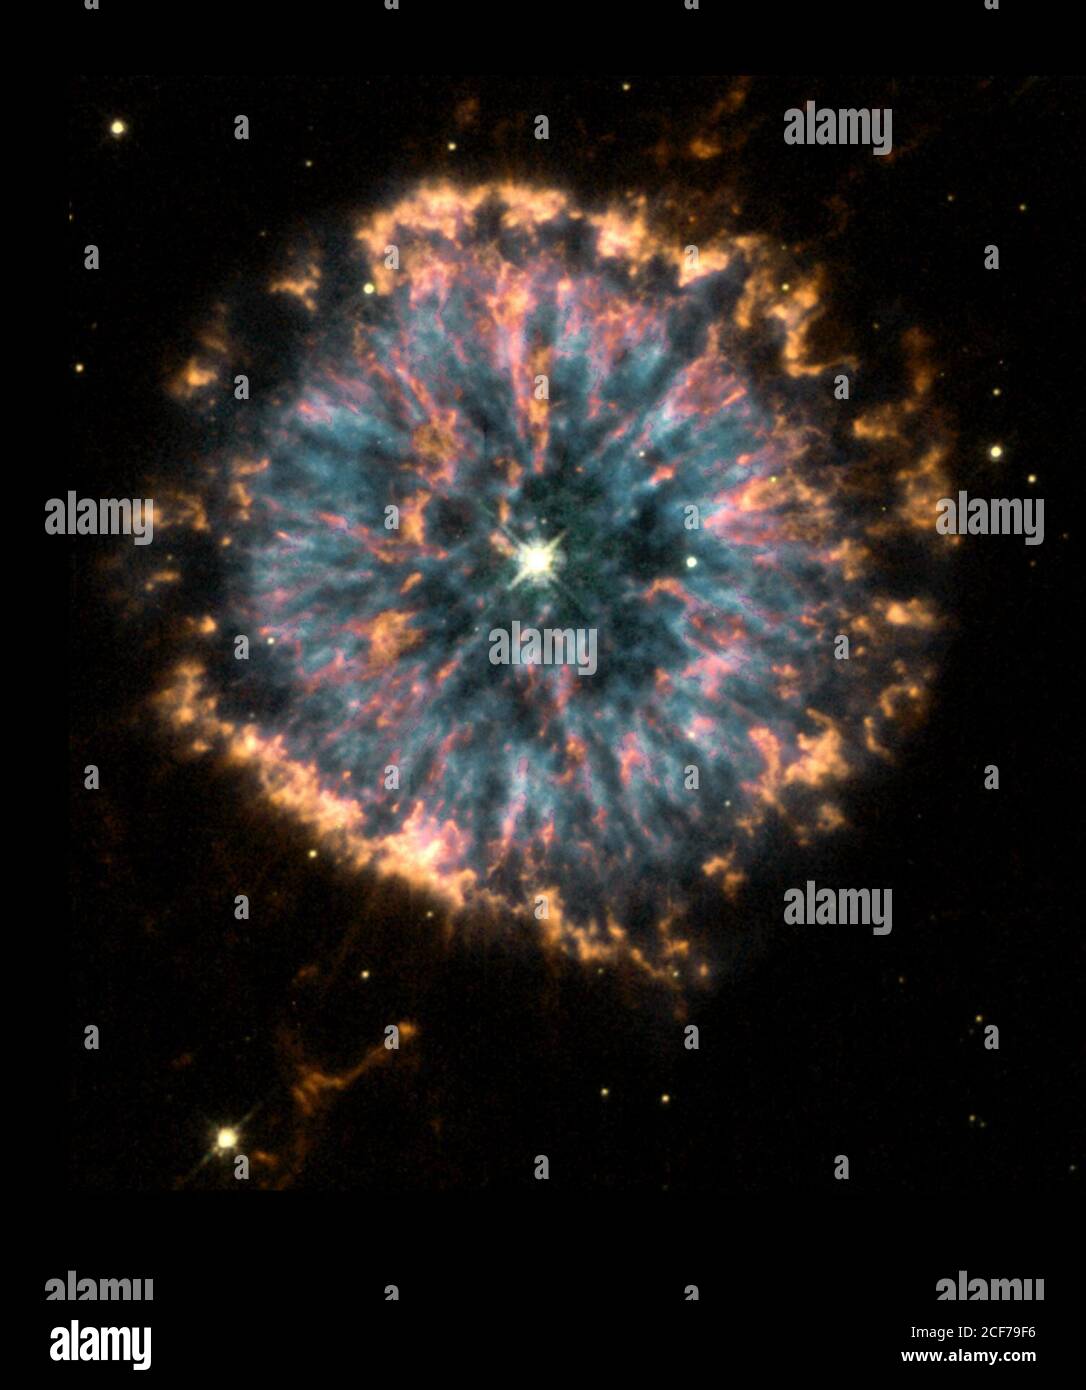 Astronomers using NASA's Hubble Space Telescope have obtained images of the strikingly unusual planetary nebula, NGC 6751. Glowing in the constellation Aquila like a giant eye, the nebula is a cloud of gas ejected several thousand years ago from the hot star visible in its center. The Hubble observations were obtained in 1998 with the Wide Field and Planetary Camera 2 (WFPC2) by a team of astronomers led by Arsen Hajian of the U.S. Naval Observatory in Washington, DC. The Hubble Heritage team, working at the Space Telescope Science Institute in Baltimore, has prepared this color rendition by c Stock Photo